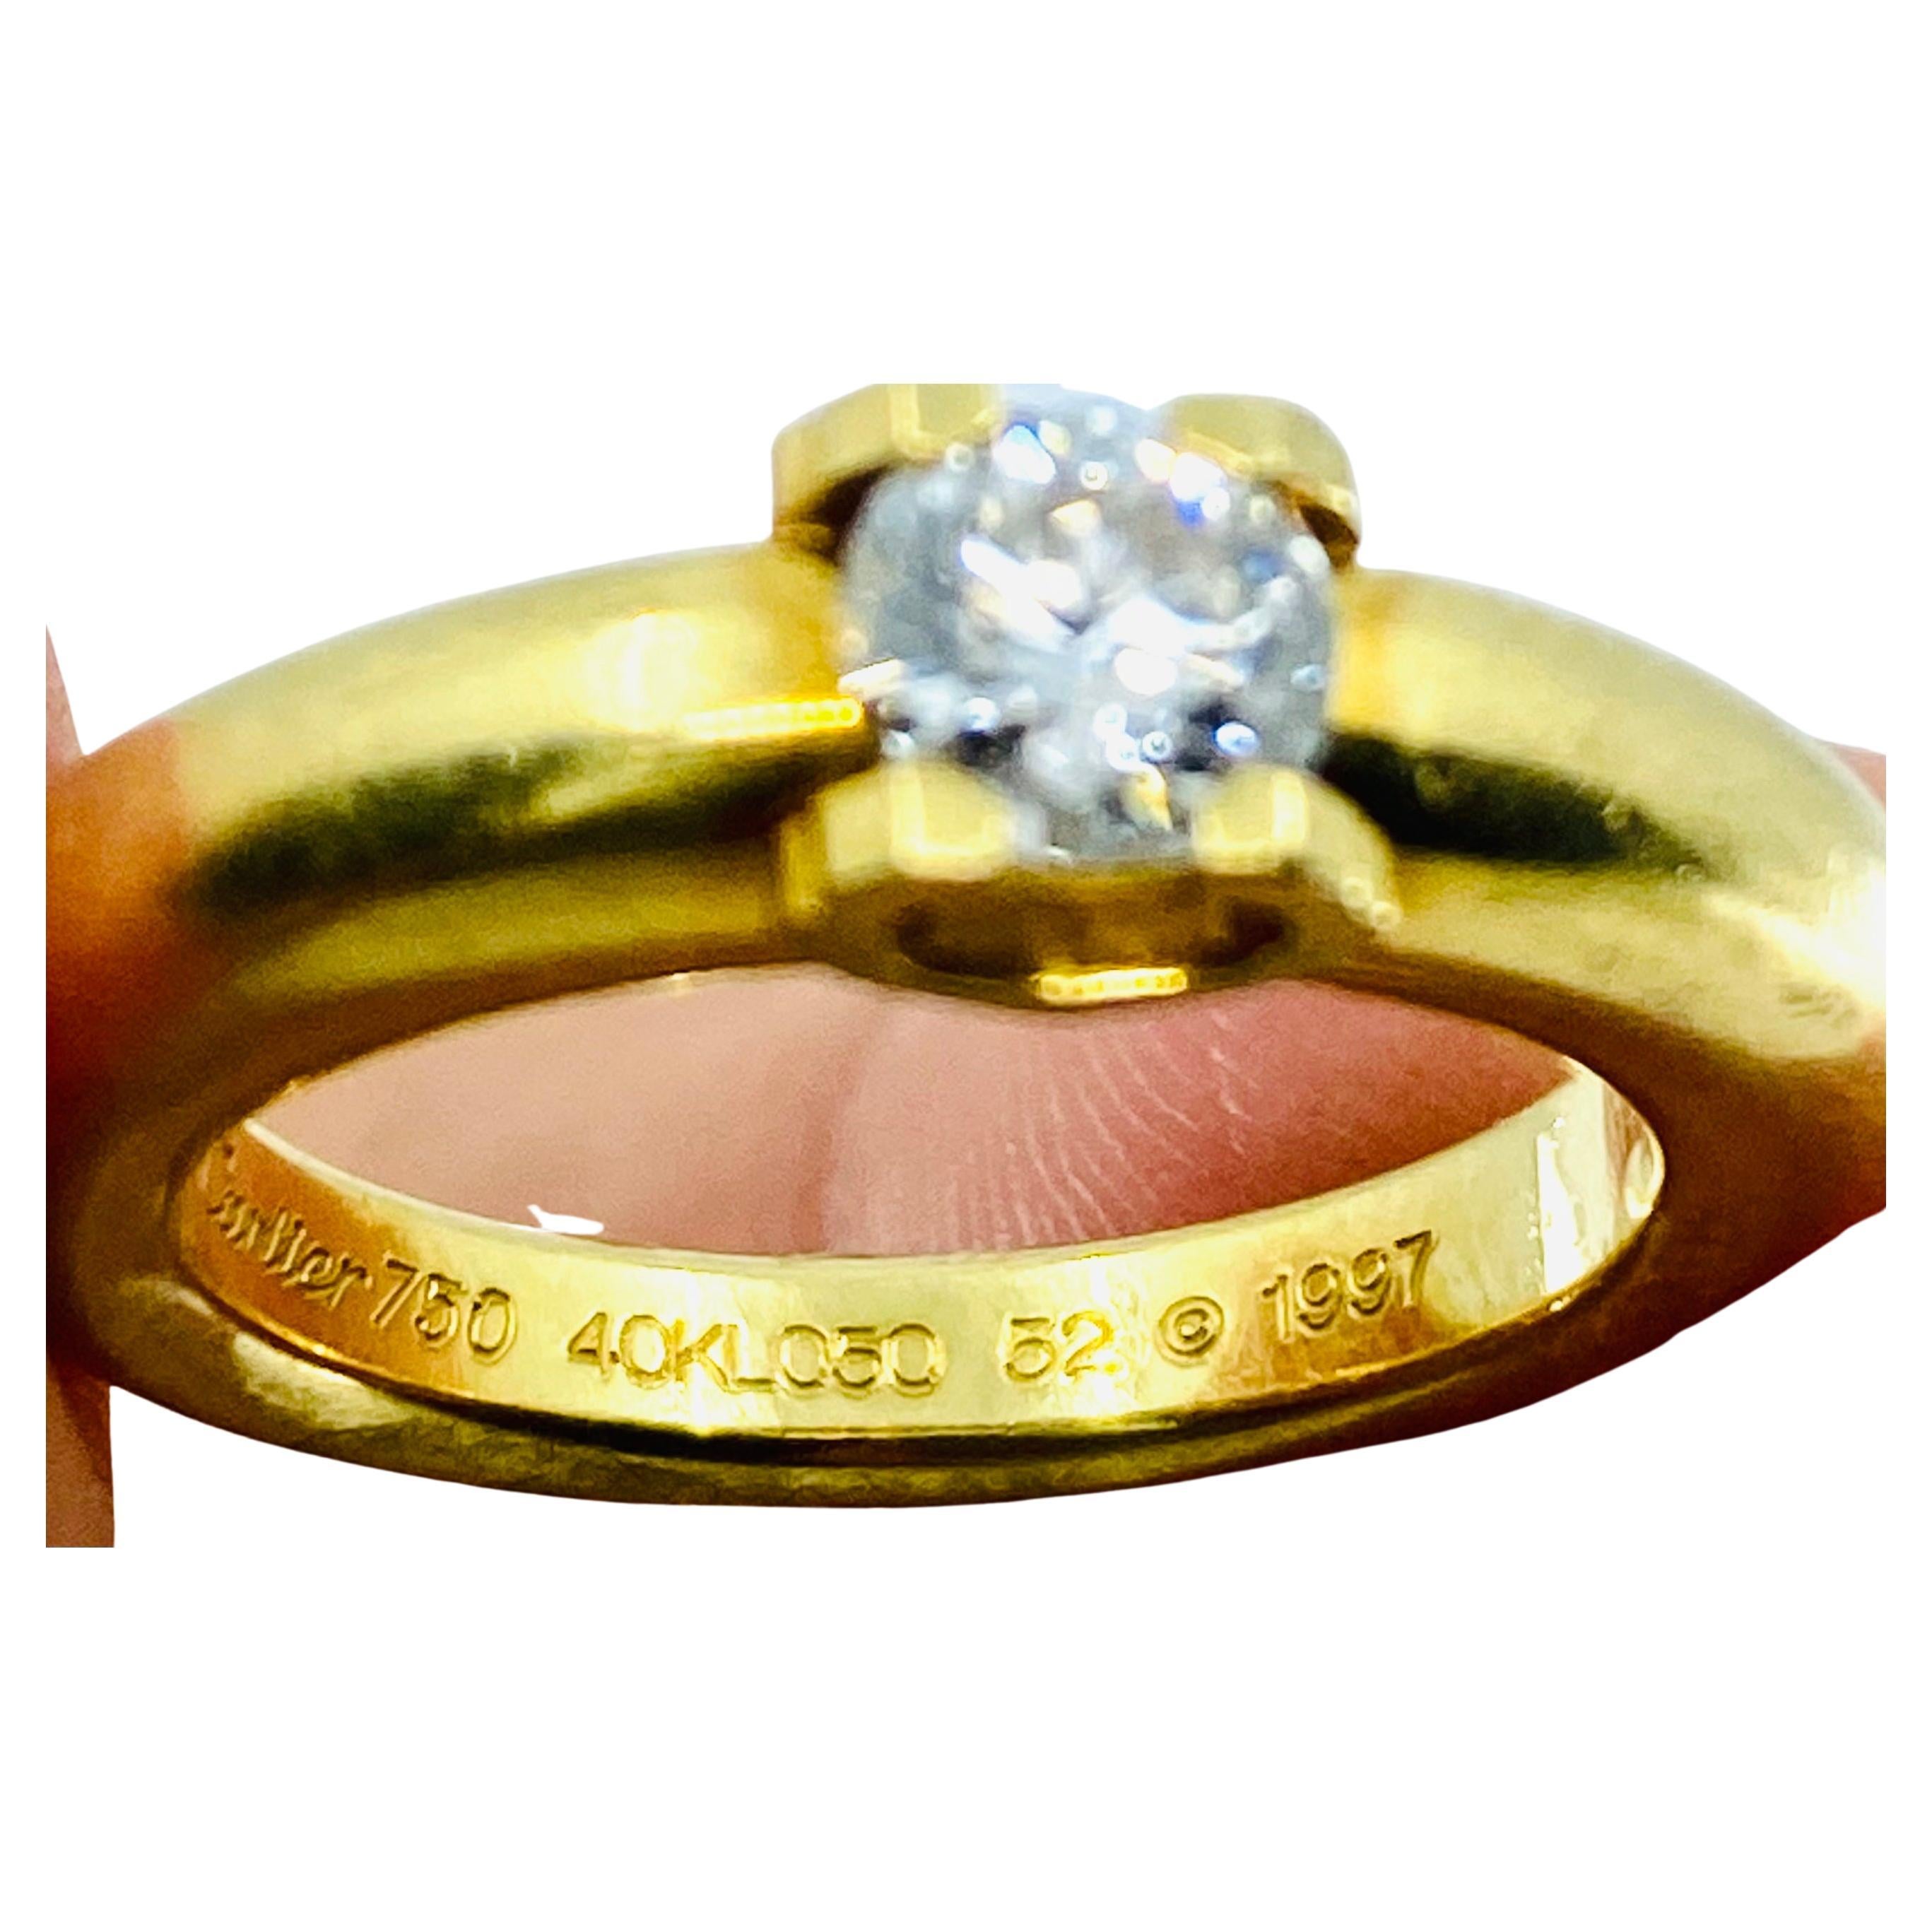 Cartier Solitaire Diamond Ring 18k Gold  3